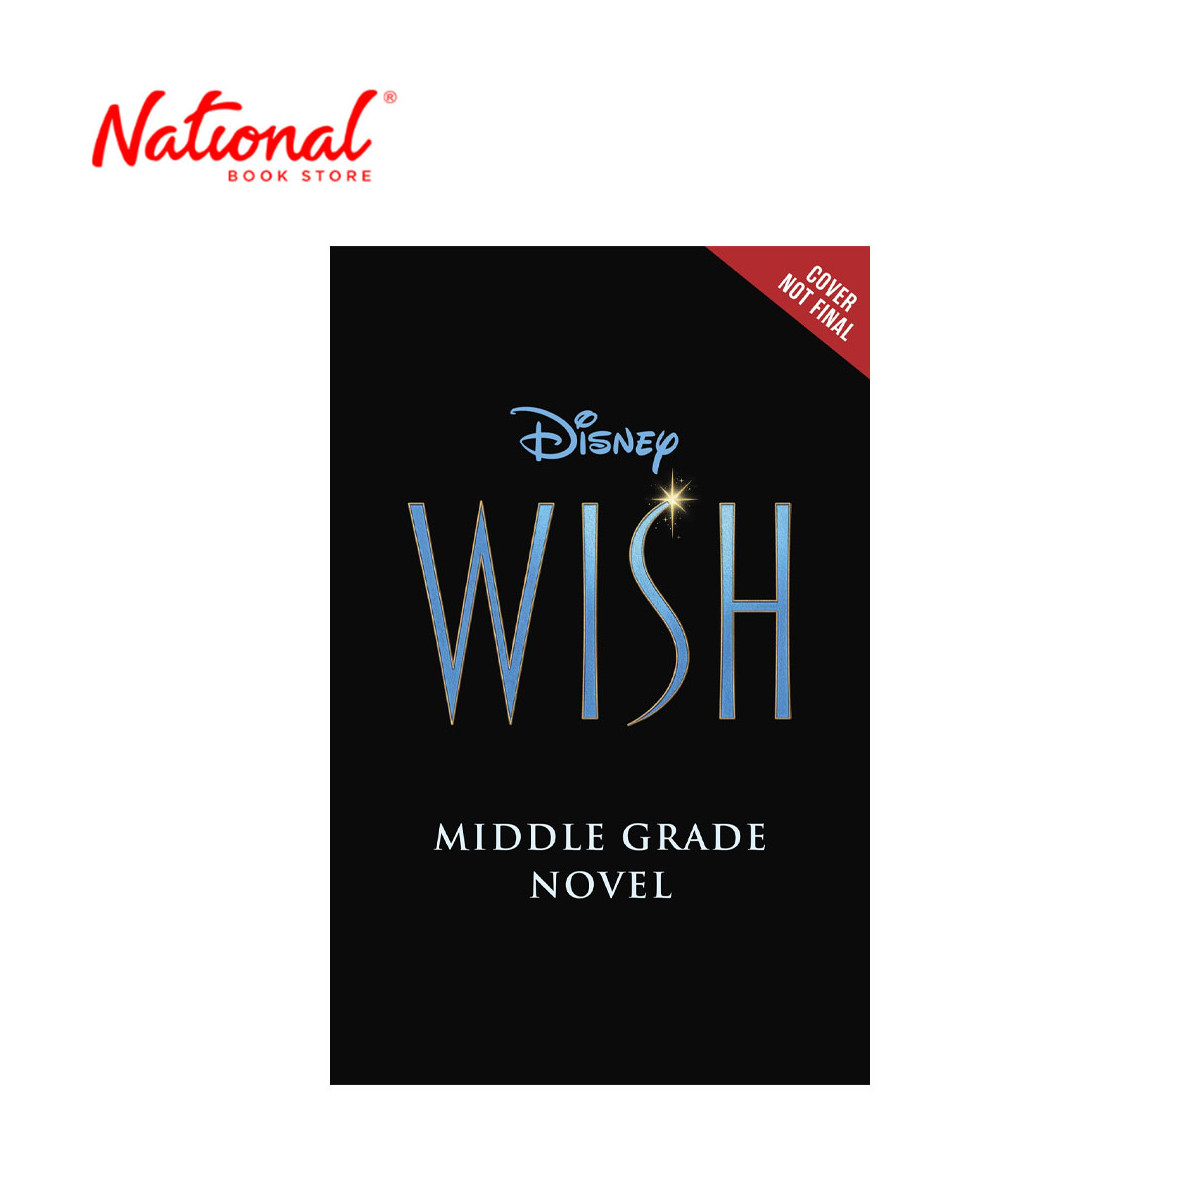 Wish Middle Grade Novel By Wendy Wan-Long Shang - Trade Paperback - Storybooks for Kids